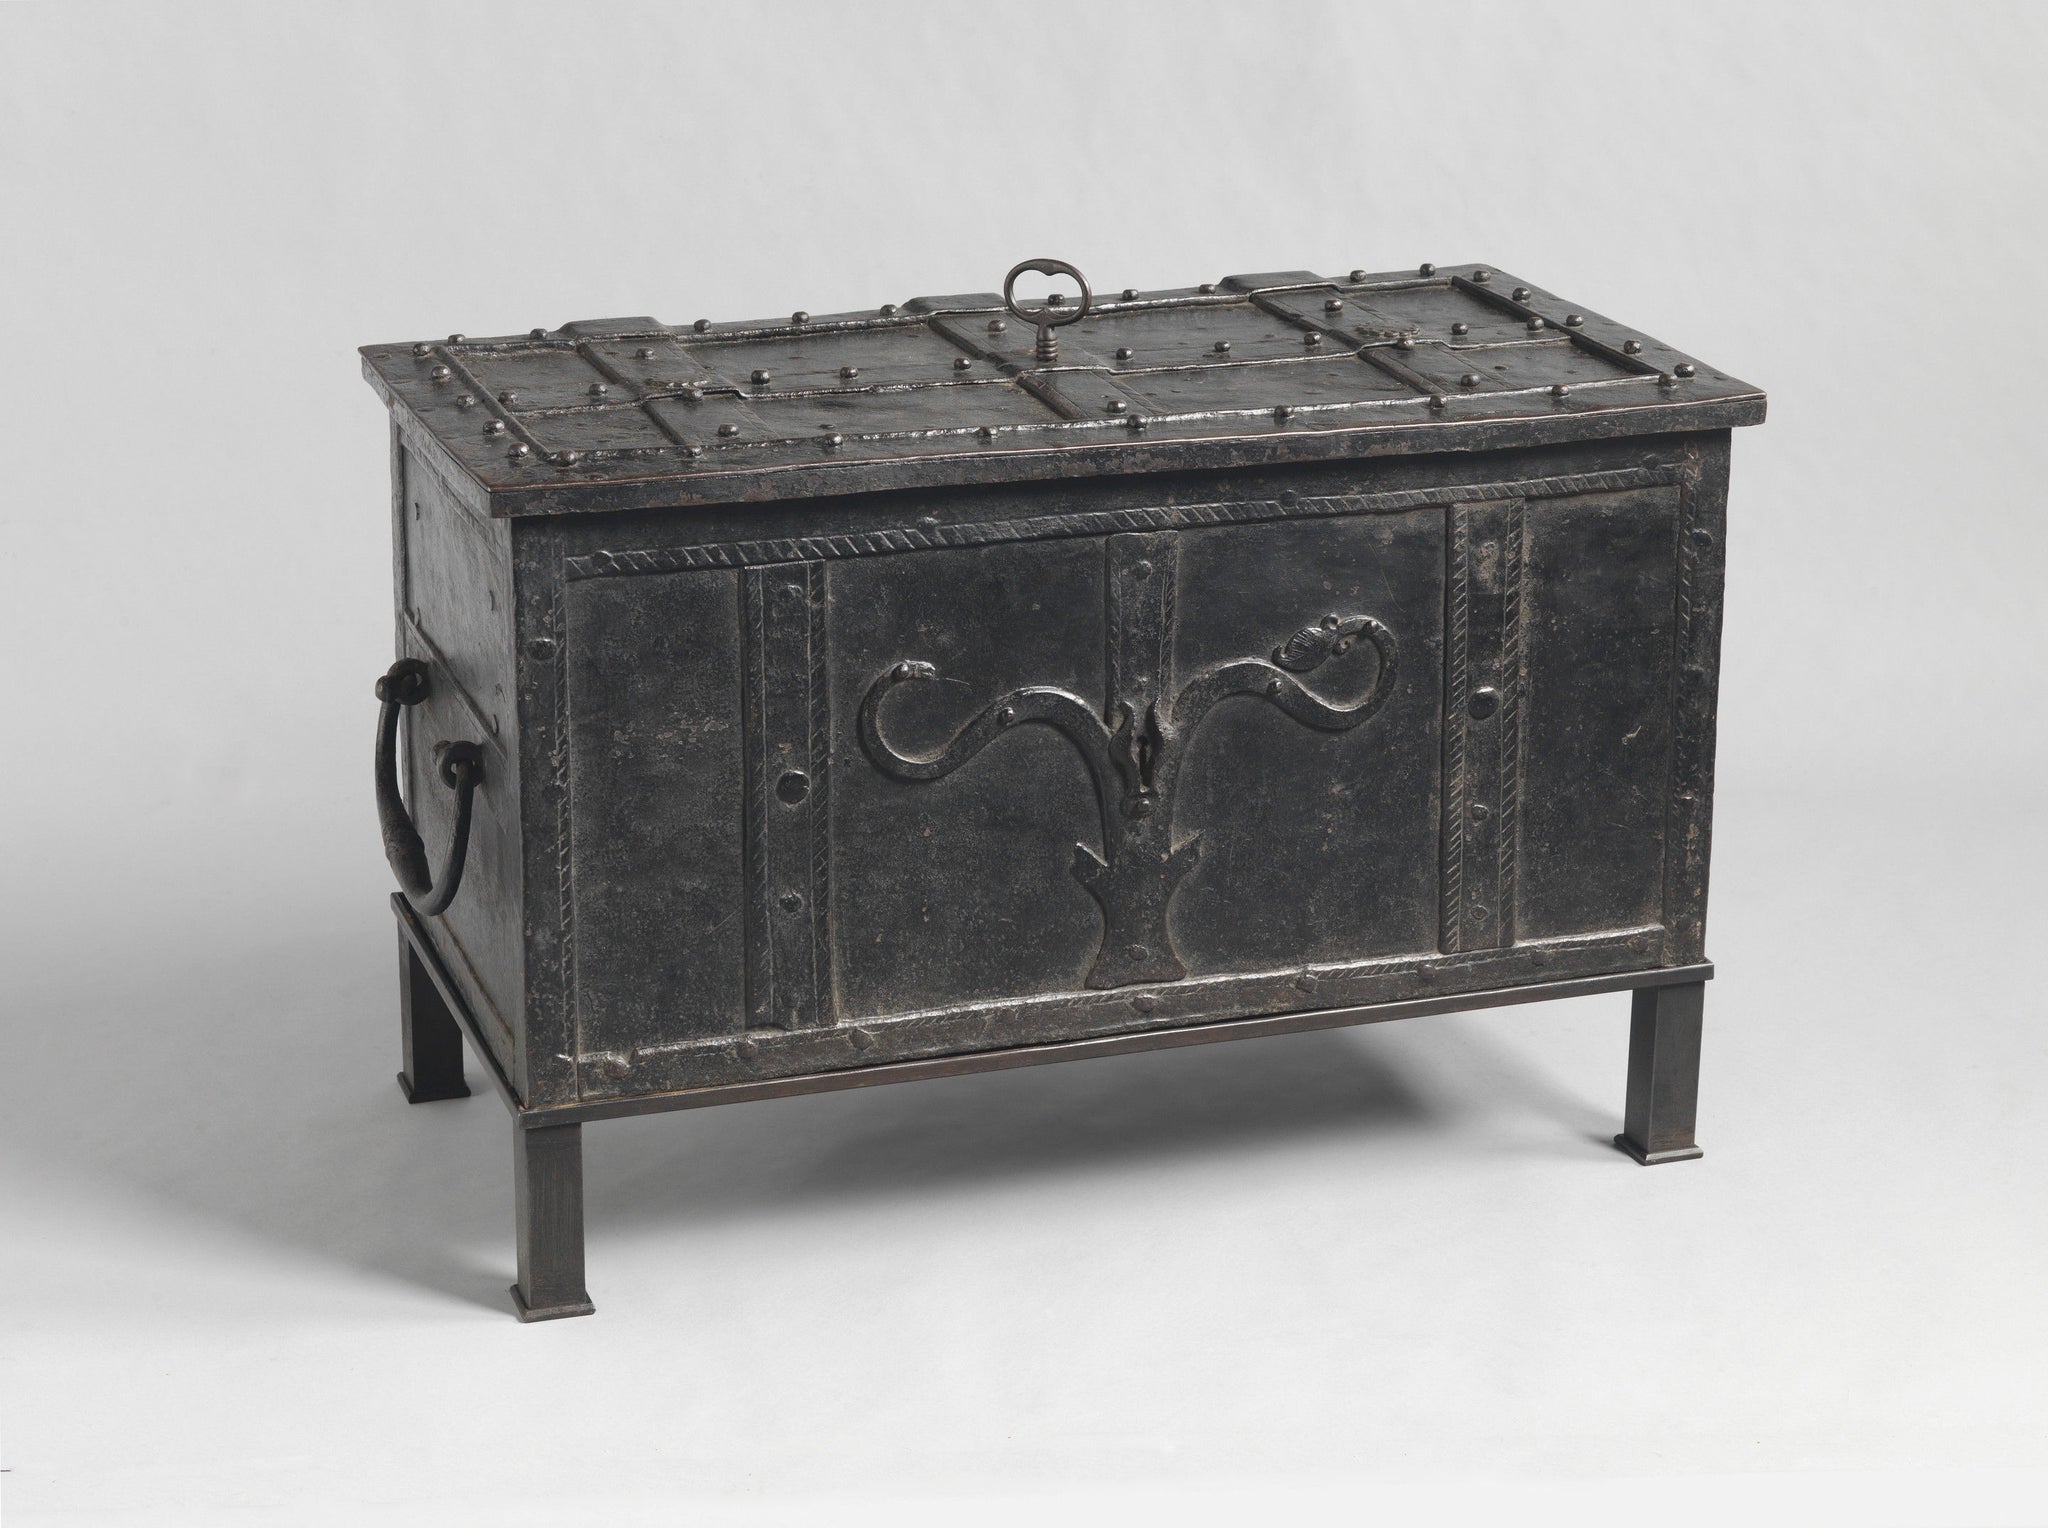 Exceptional Early Strongbox or 'Armada Chest'